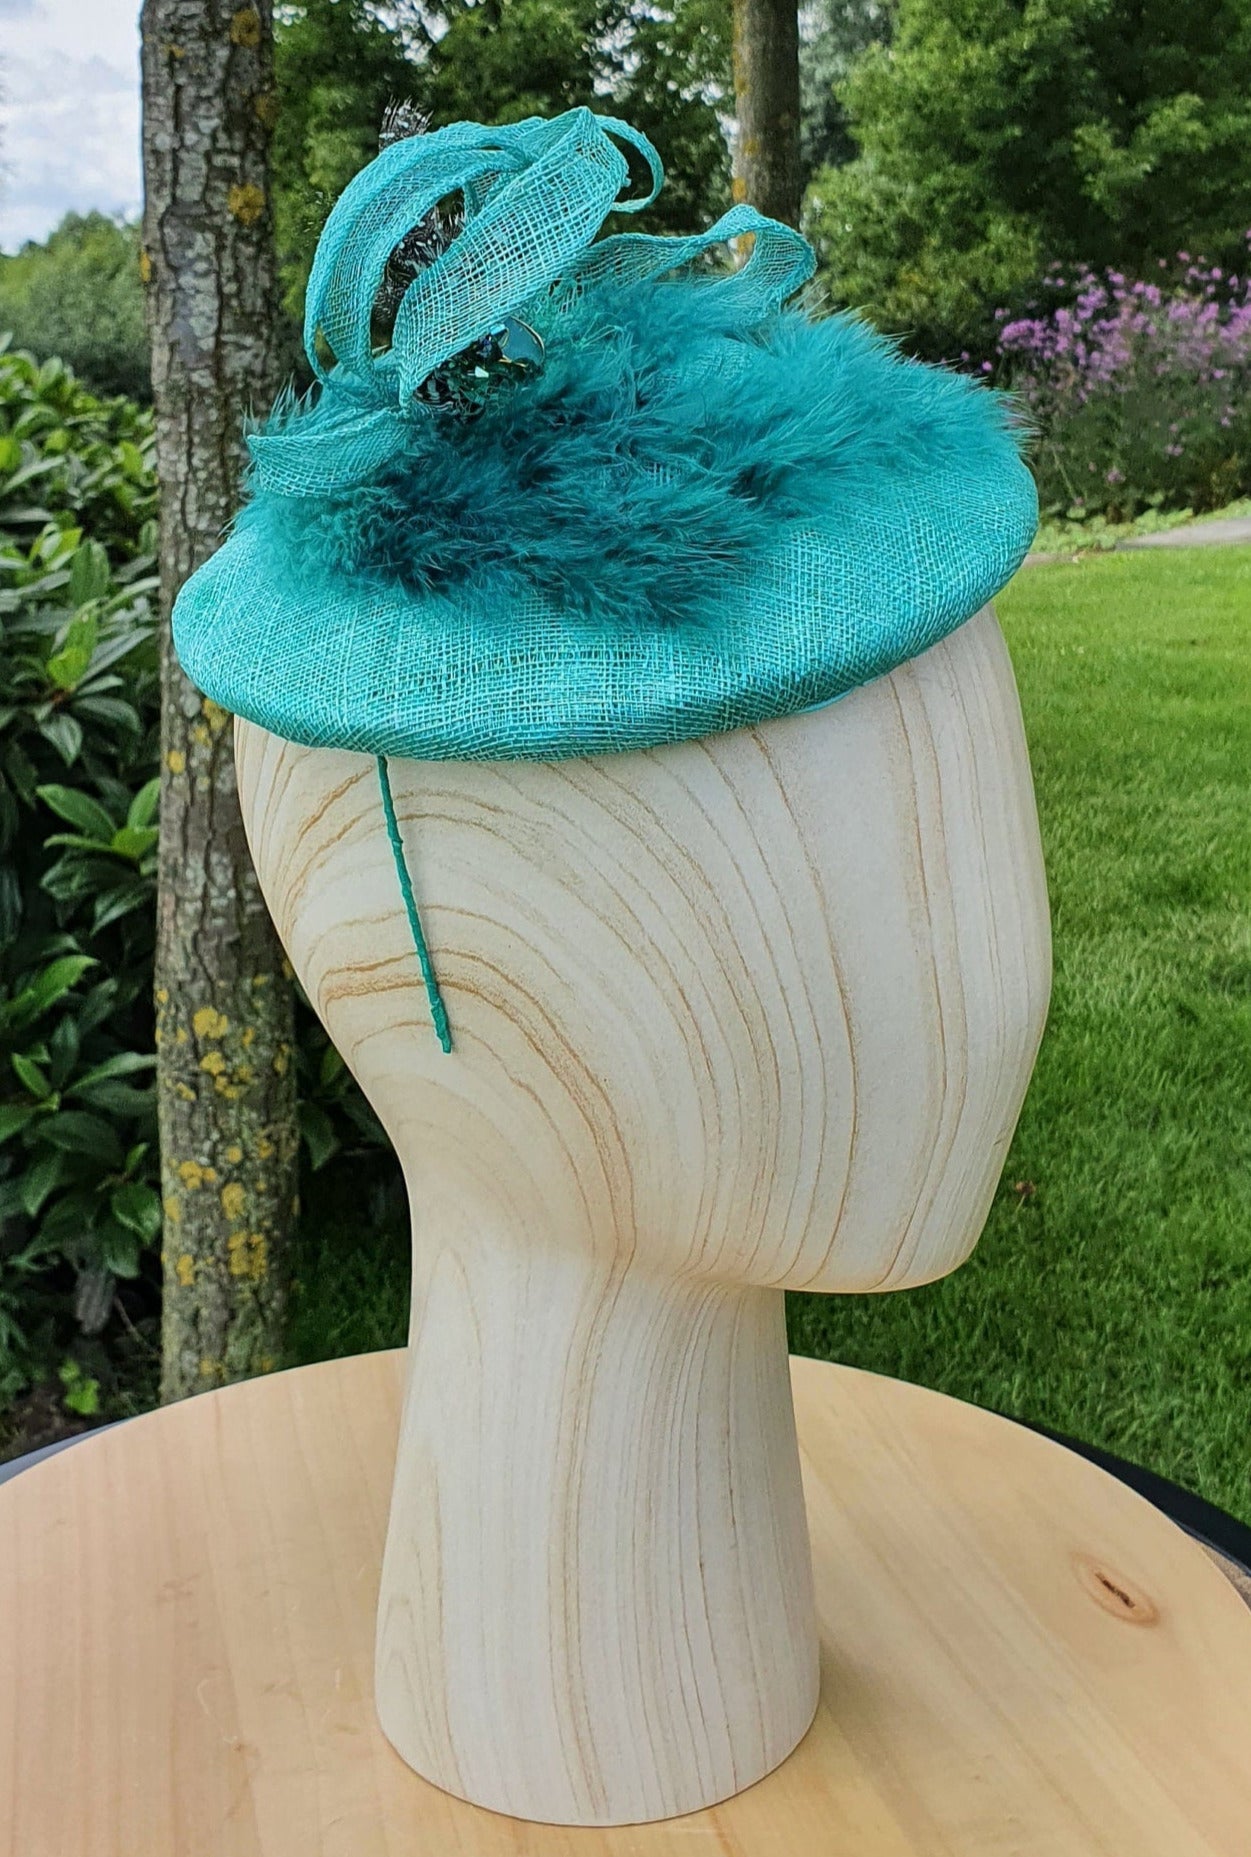 Handmade round mint green fascinator millinery from Sinamay with green feathers